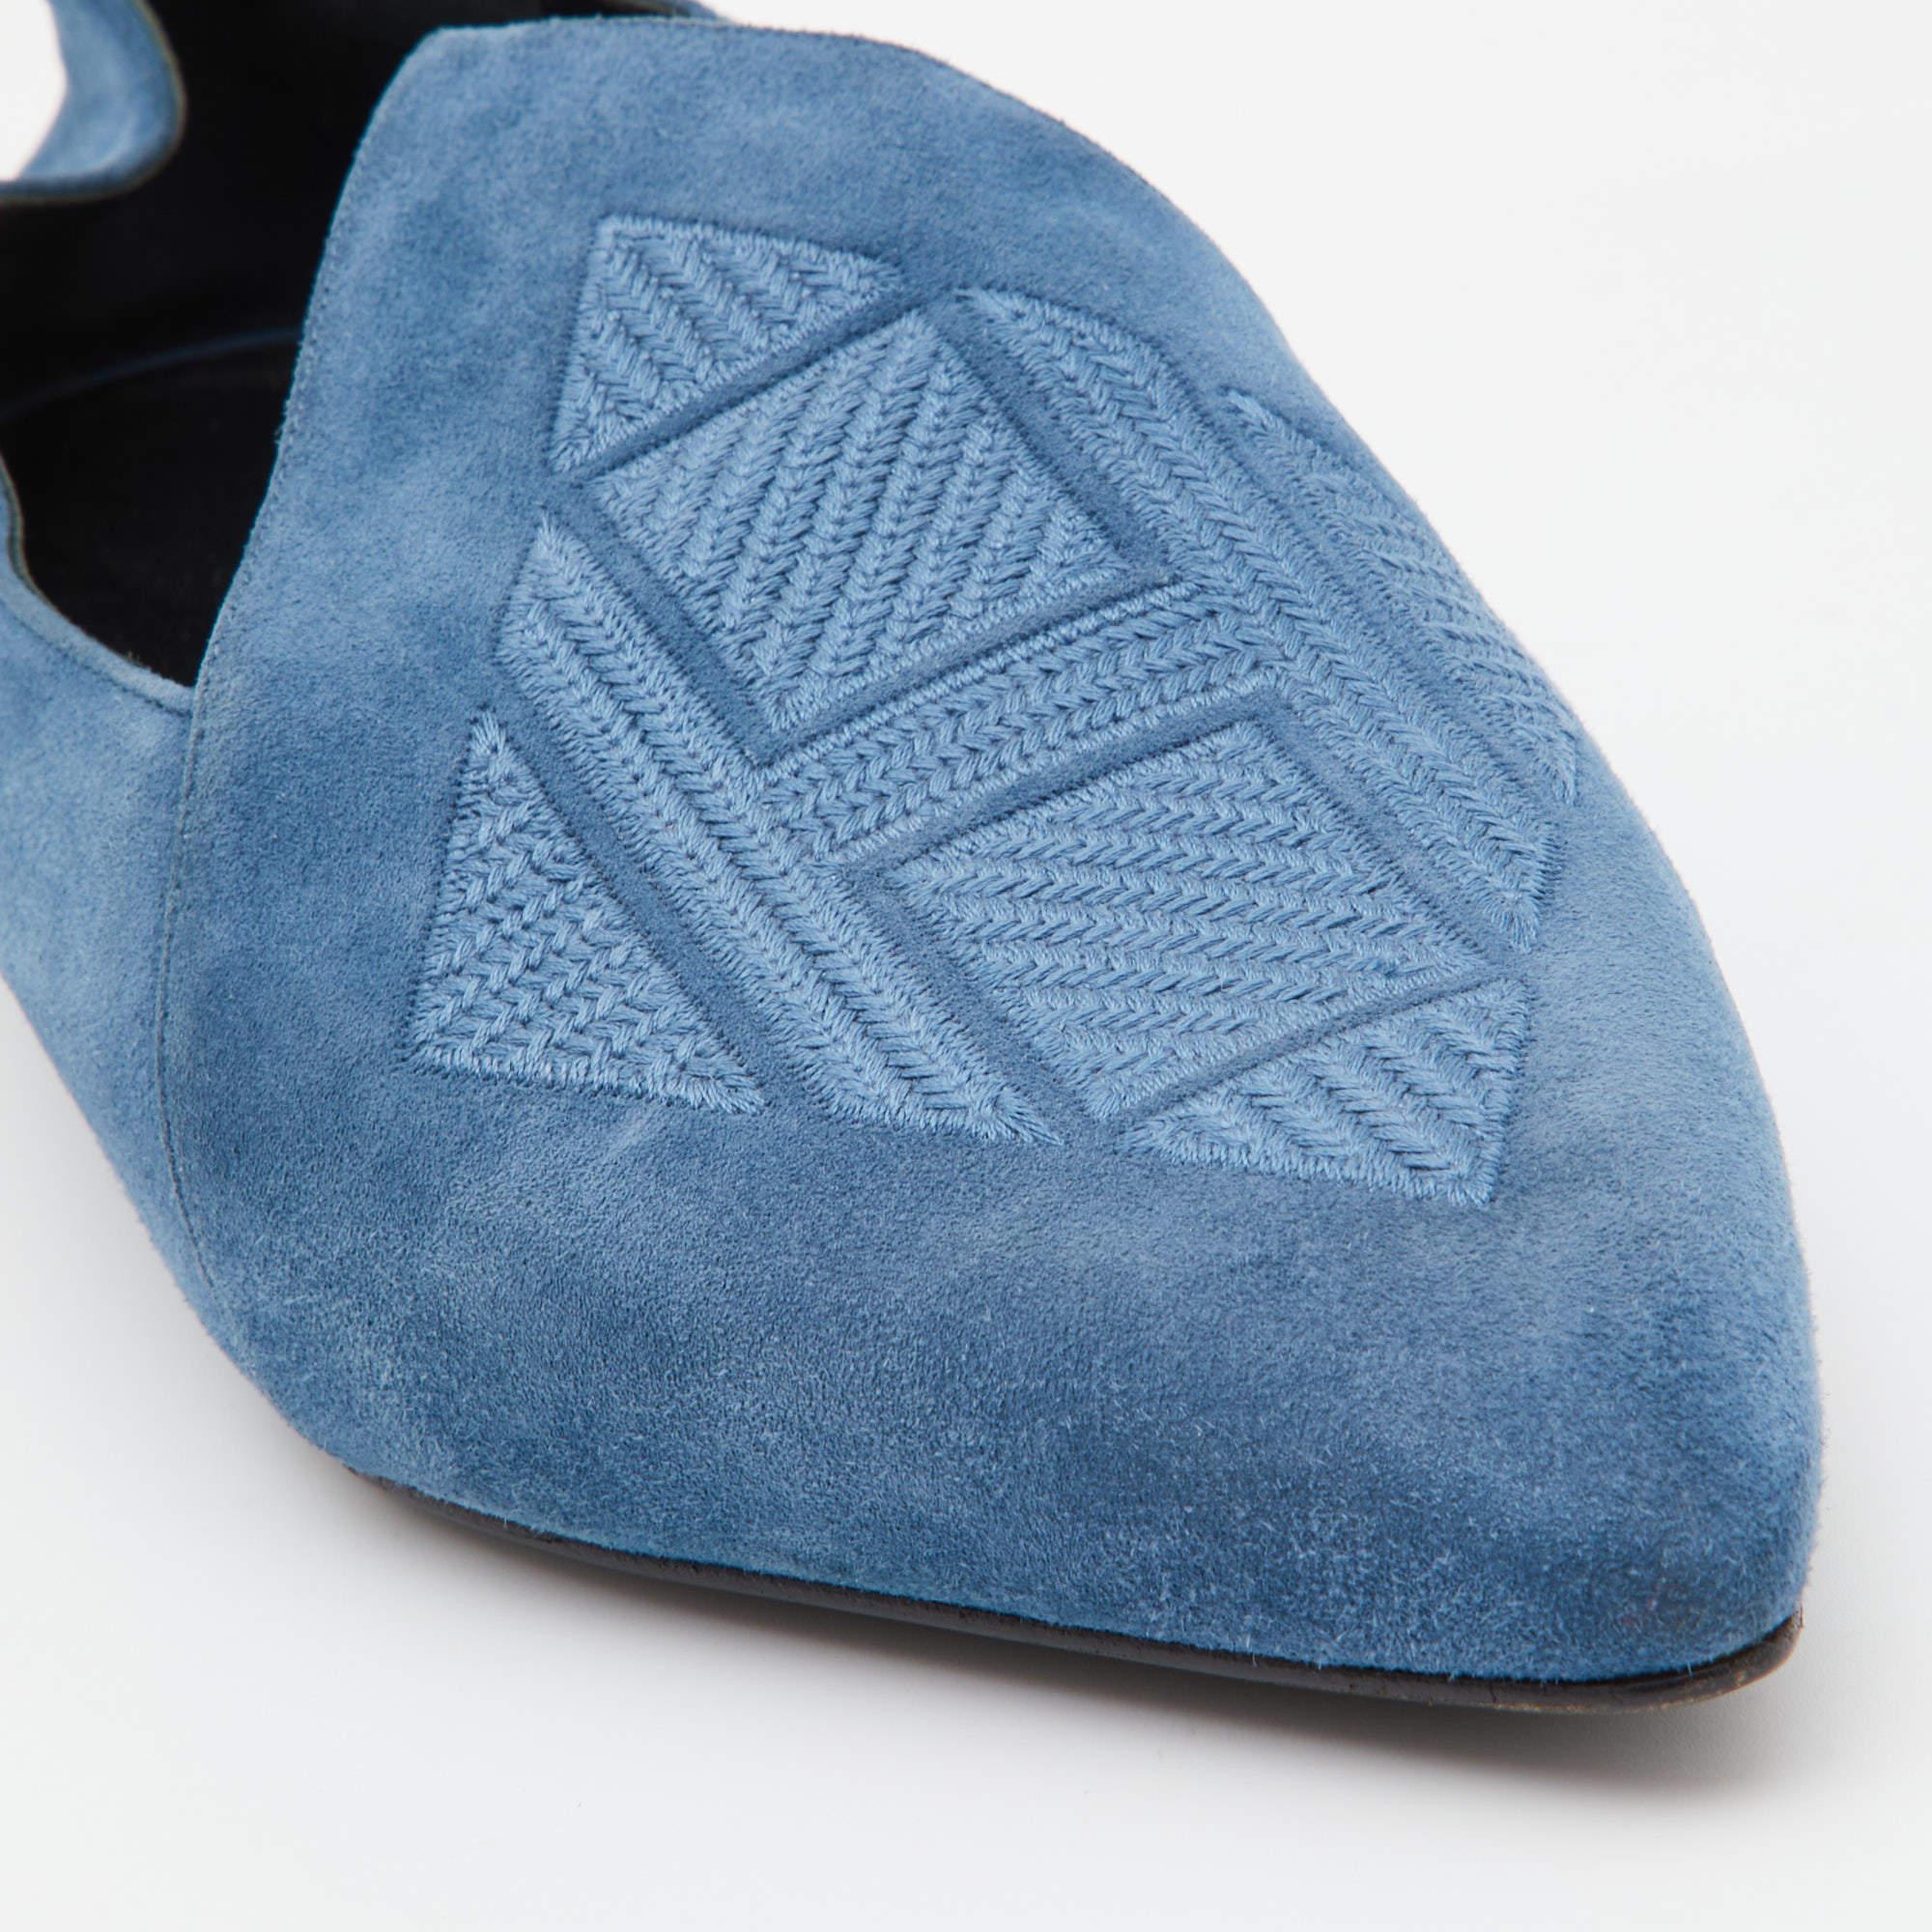 Hermes Blue Suede Pointed Toe Ballet Flats Size 39 1